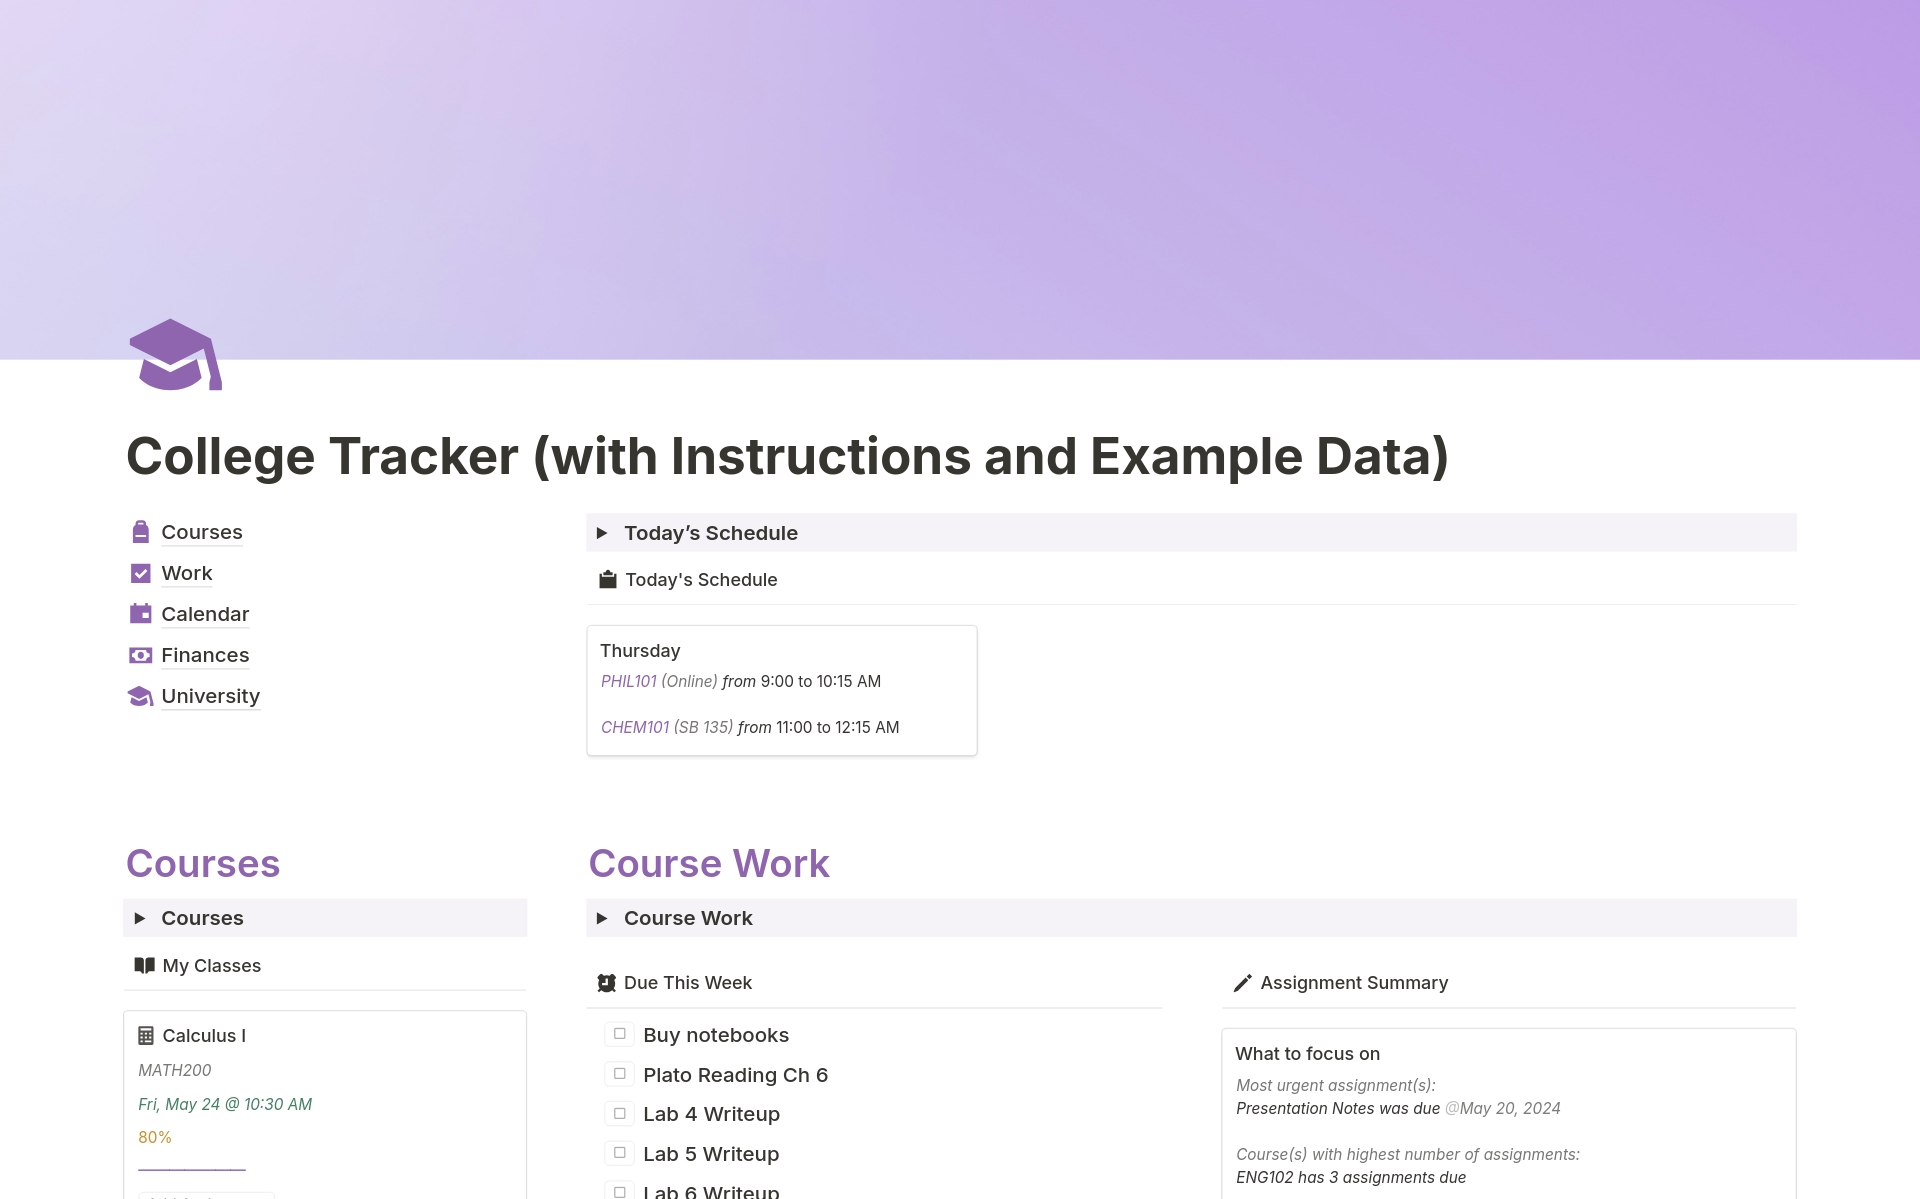 A comprehensive Notion template to help track your courses, assignments, notes, grades, finances, calendars and more!